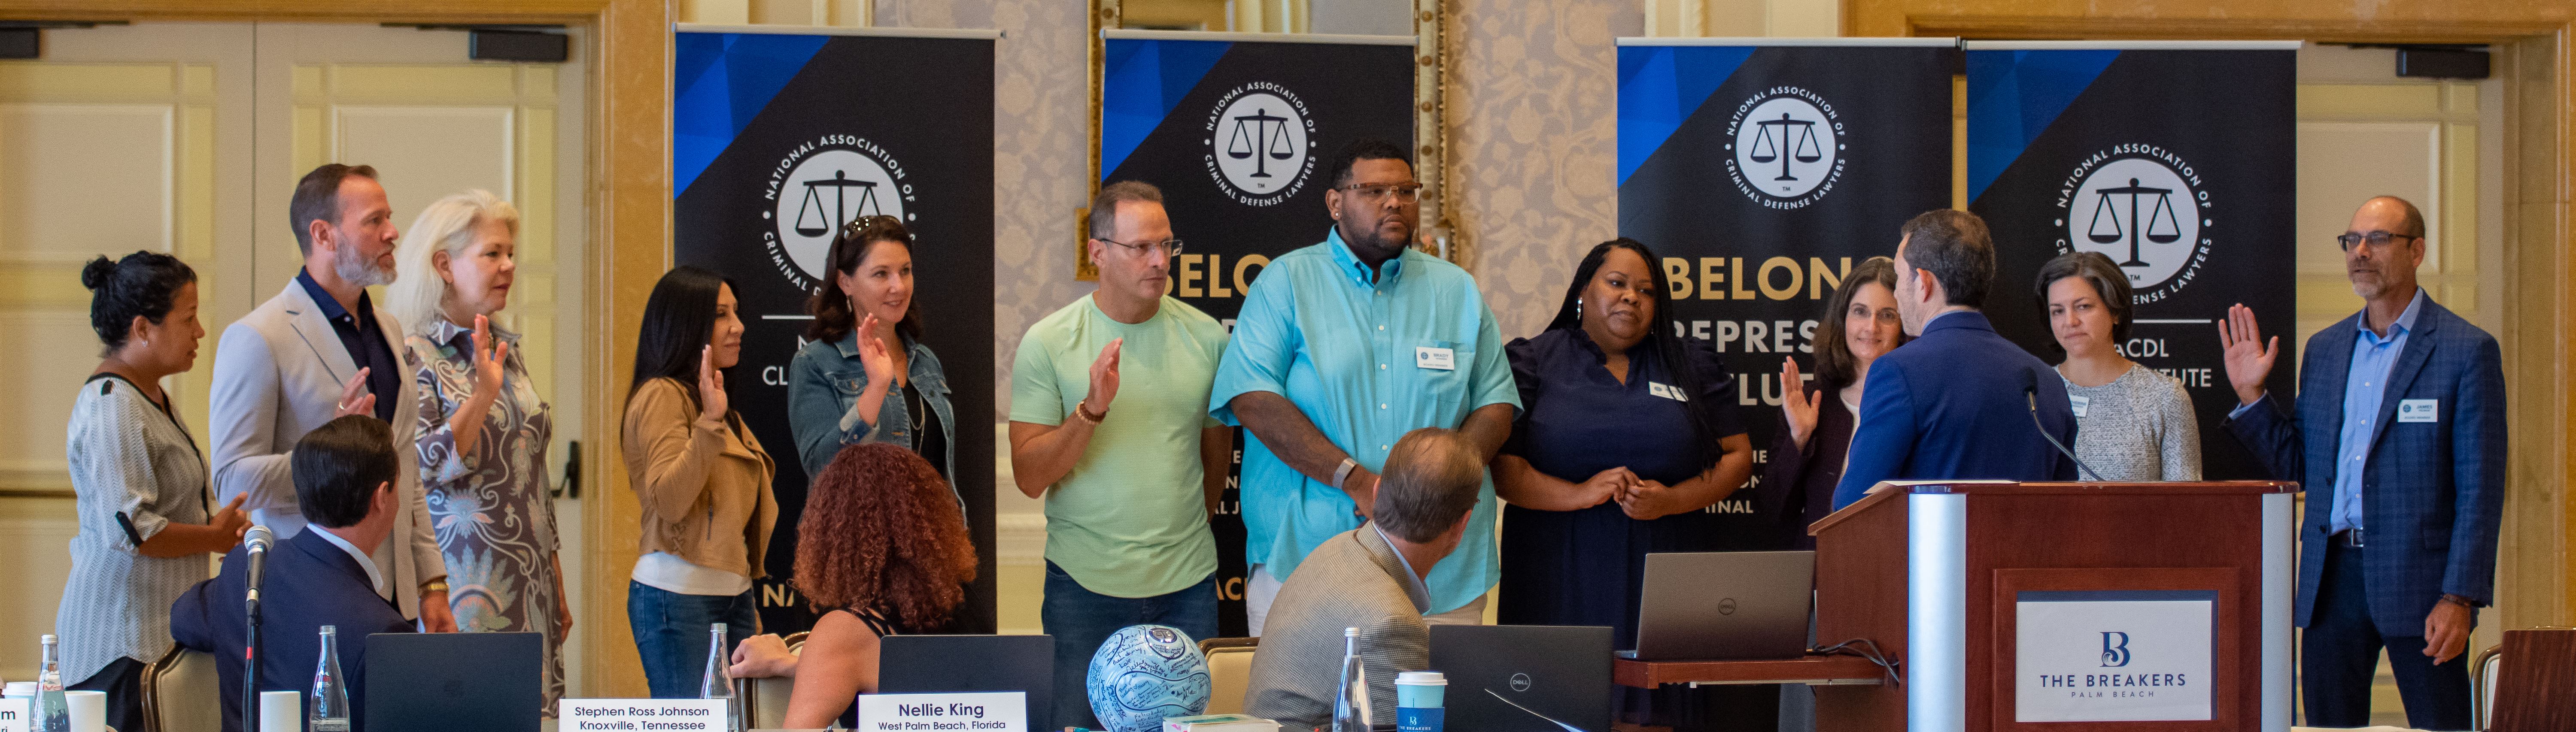 Board of Directors of the National Association of Criminal Defense Lawyers Swearing In